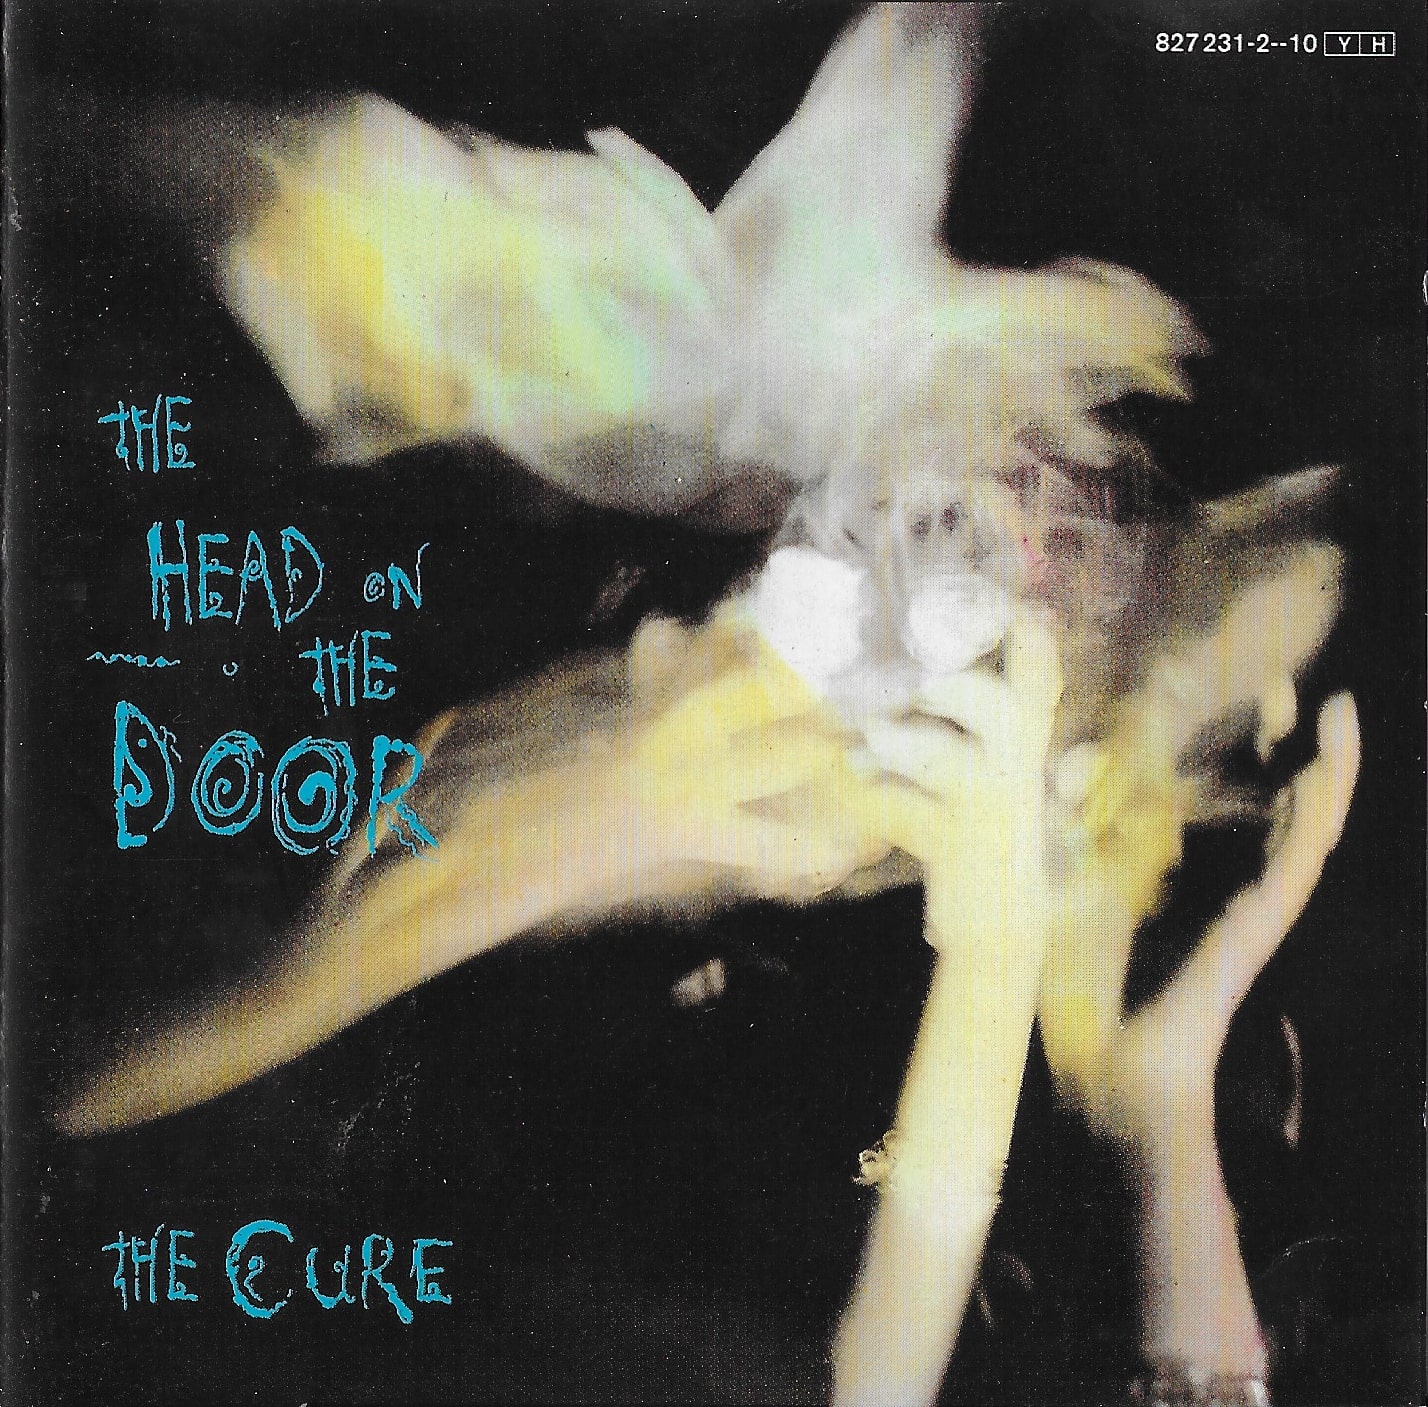 Picture of 827231 - 2 The head on the door by artist The Cure